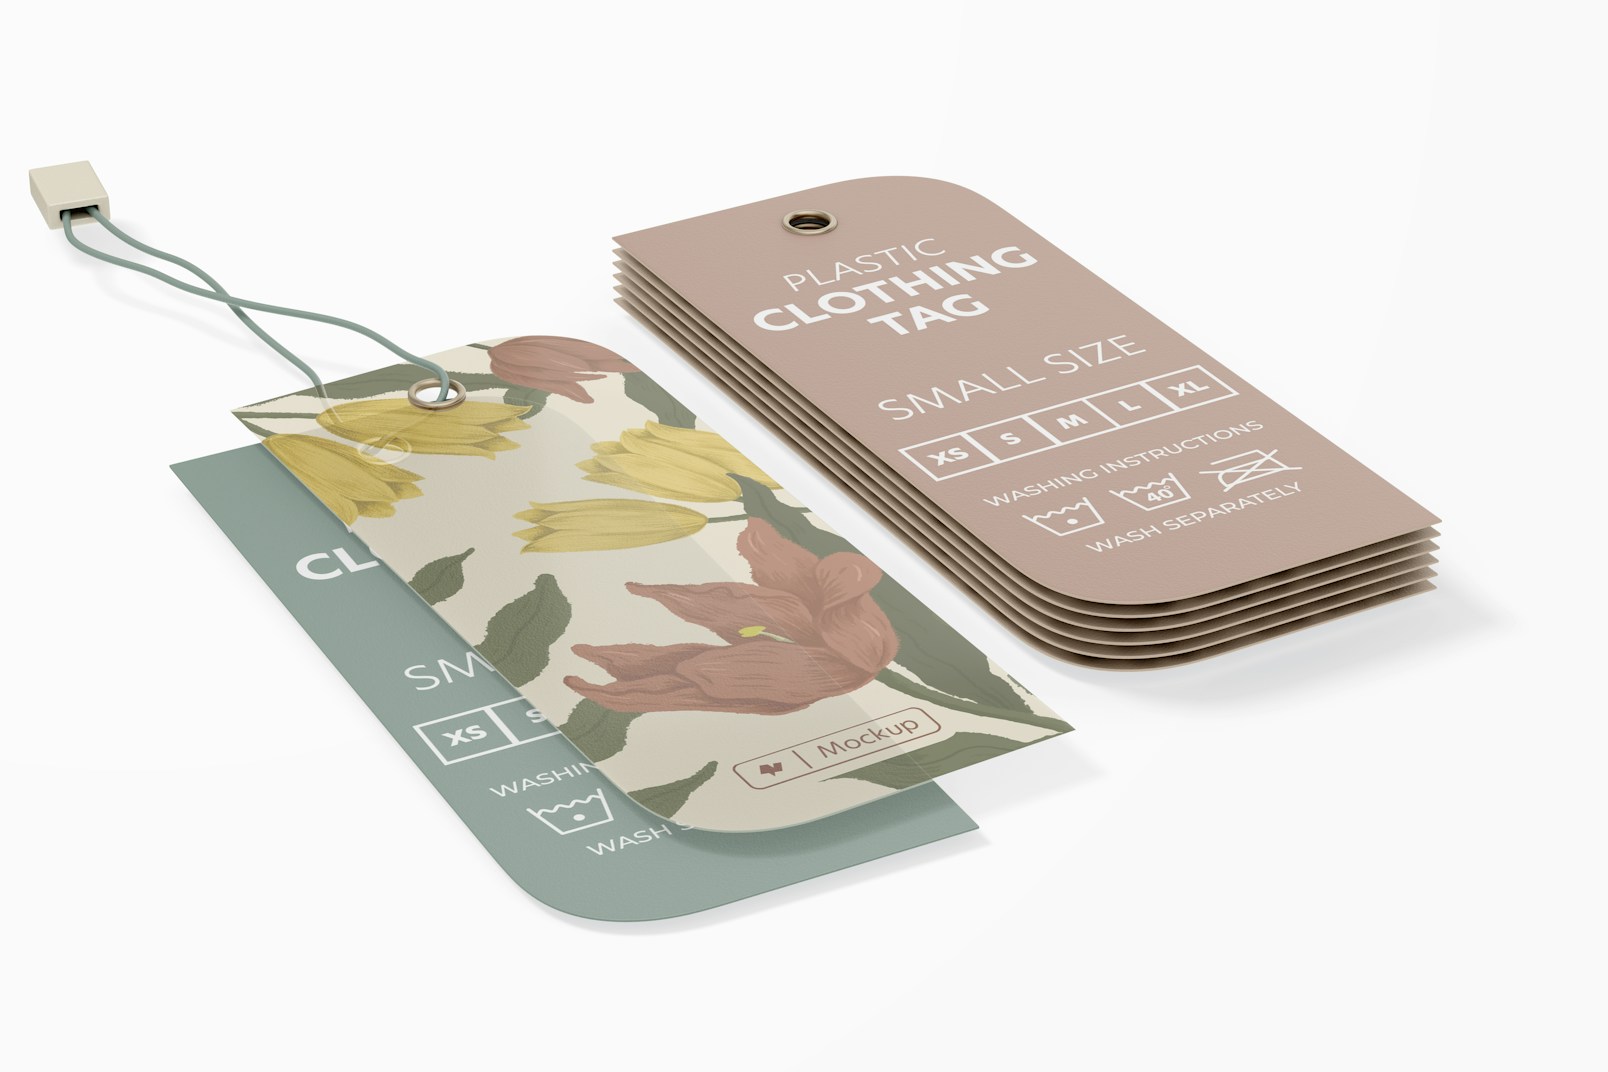 Double Plastic Clothing Tags Mockup, Stacked